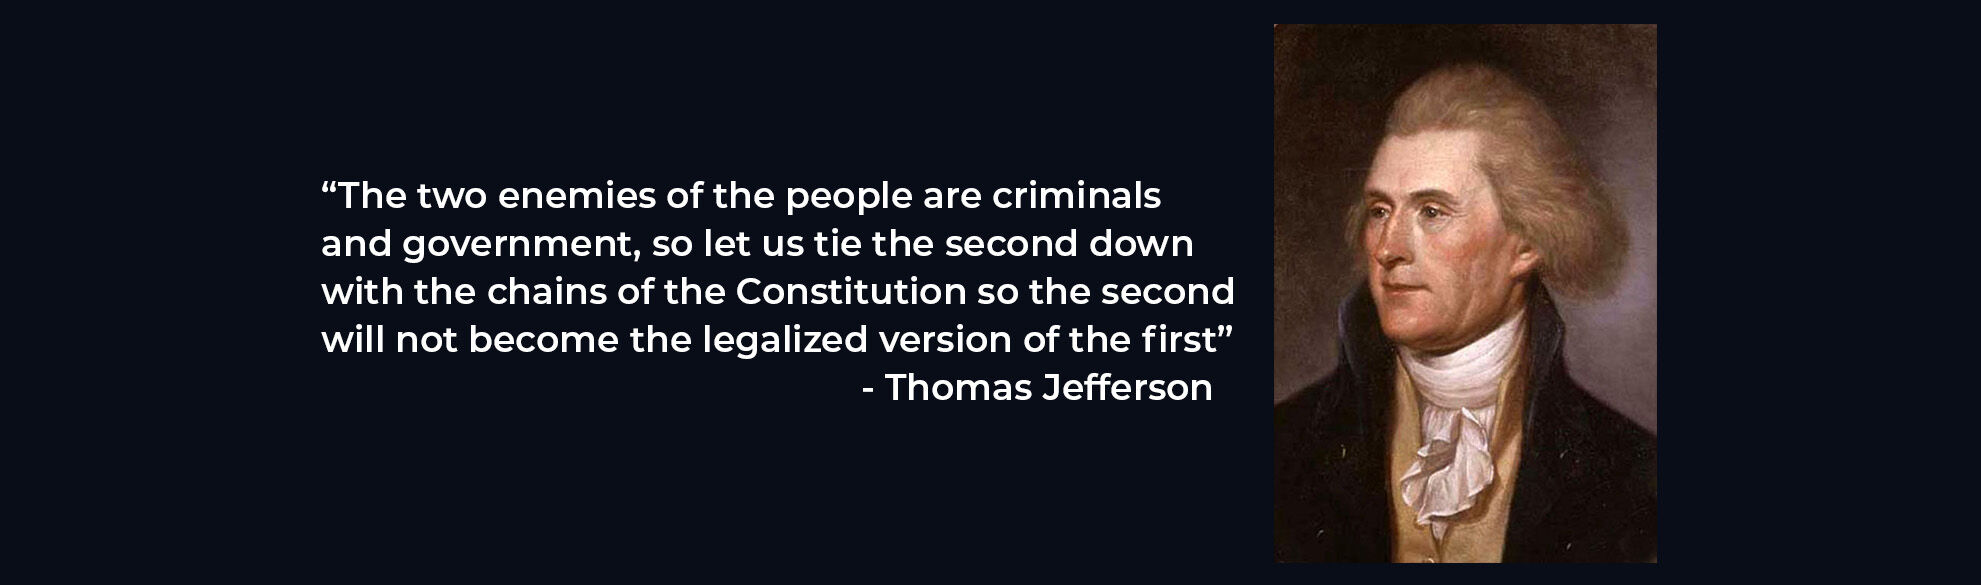 Thomas Jefferson - Absent Justice 